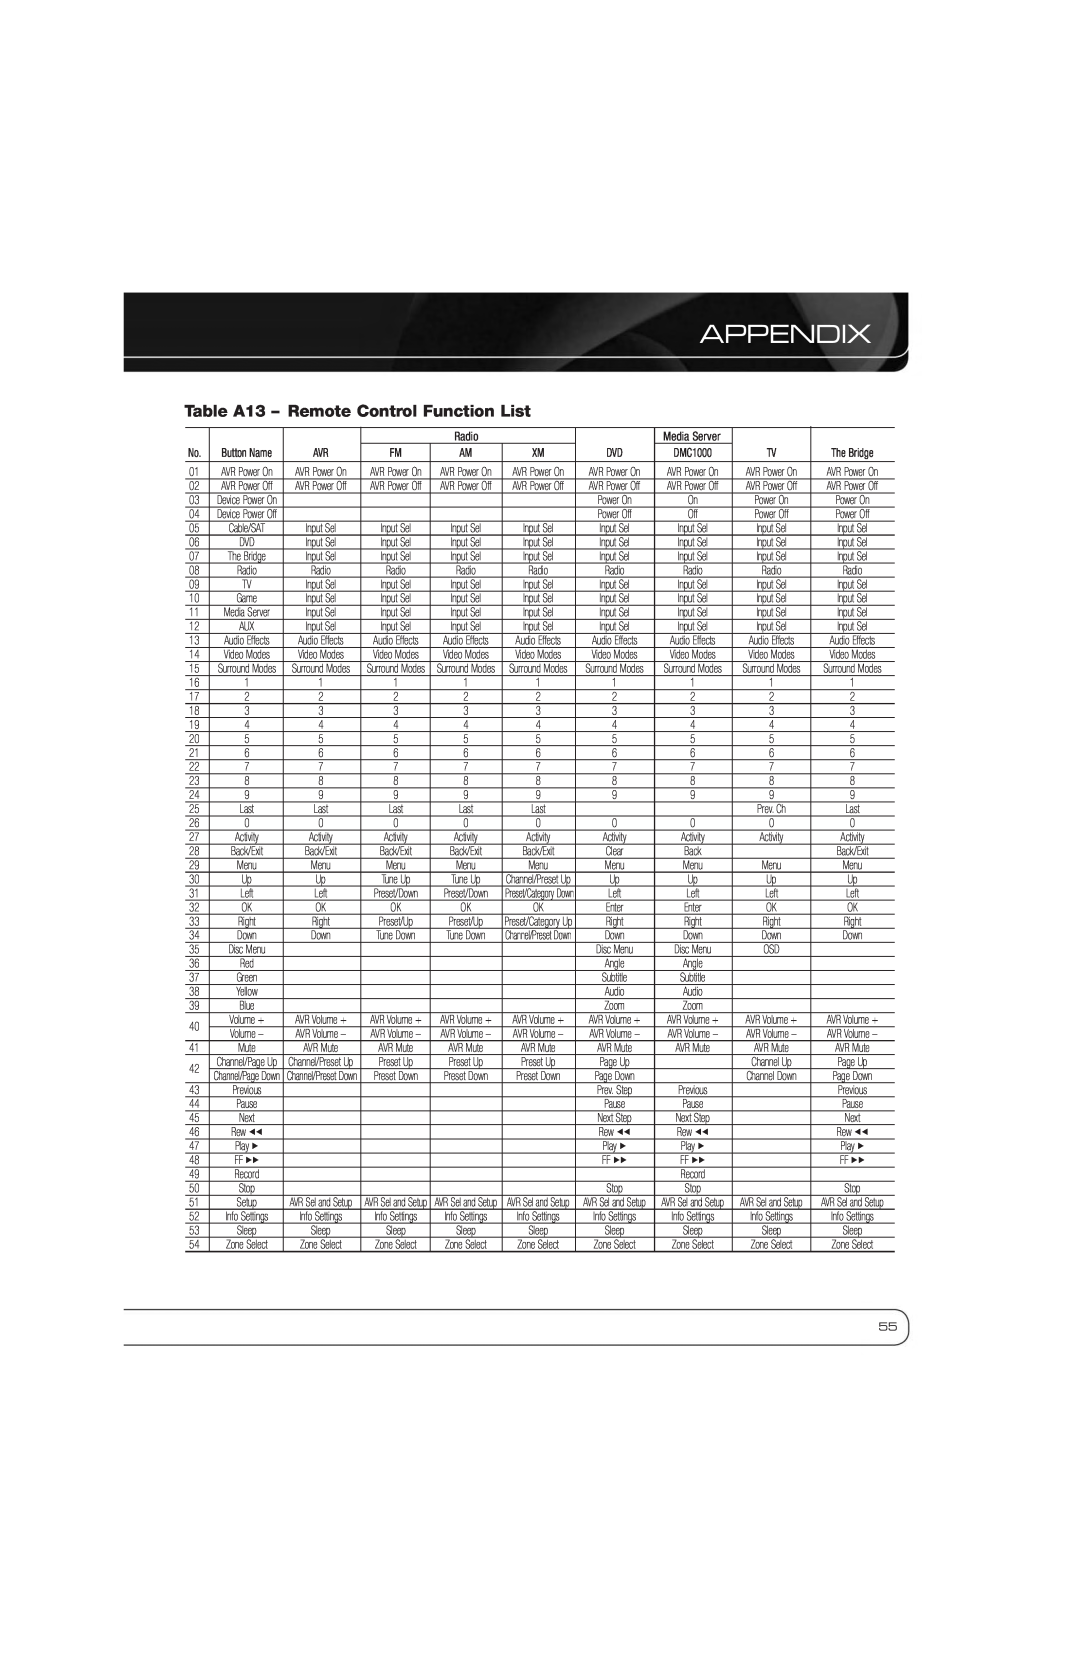 Harman AVR 2600 owner manual Table A13 - Remote Control Function List, Appendix 